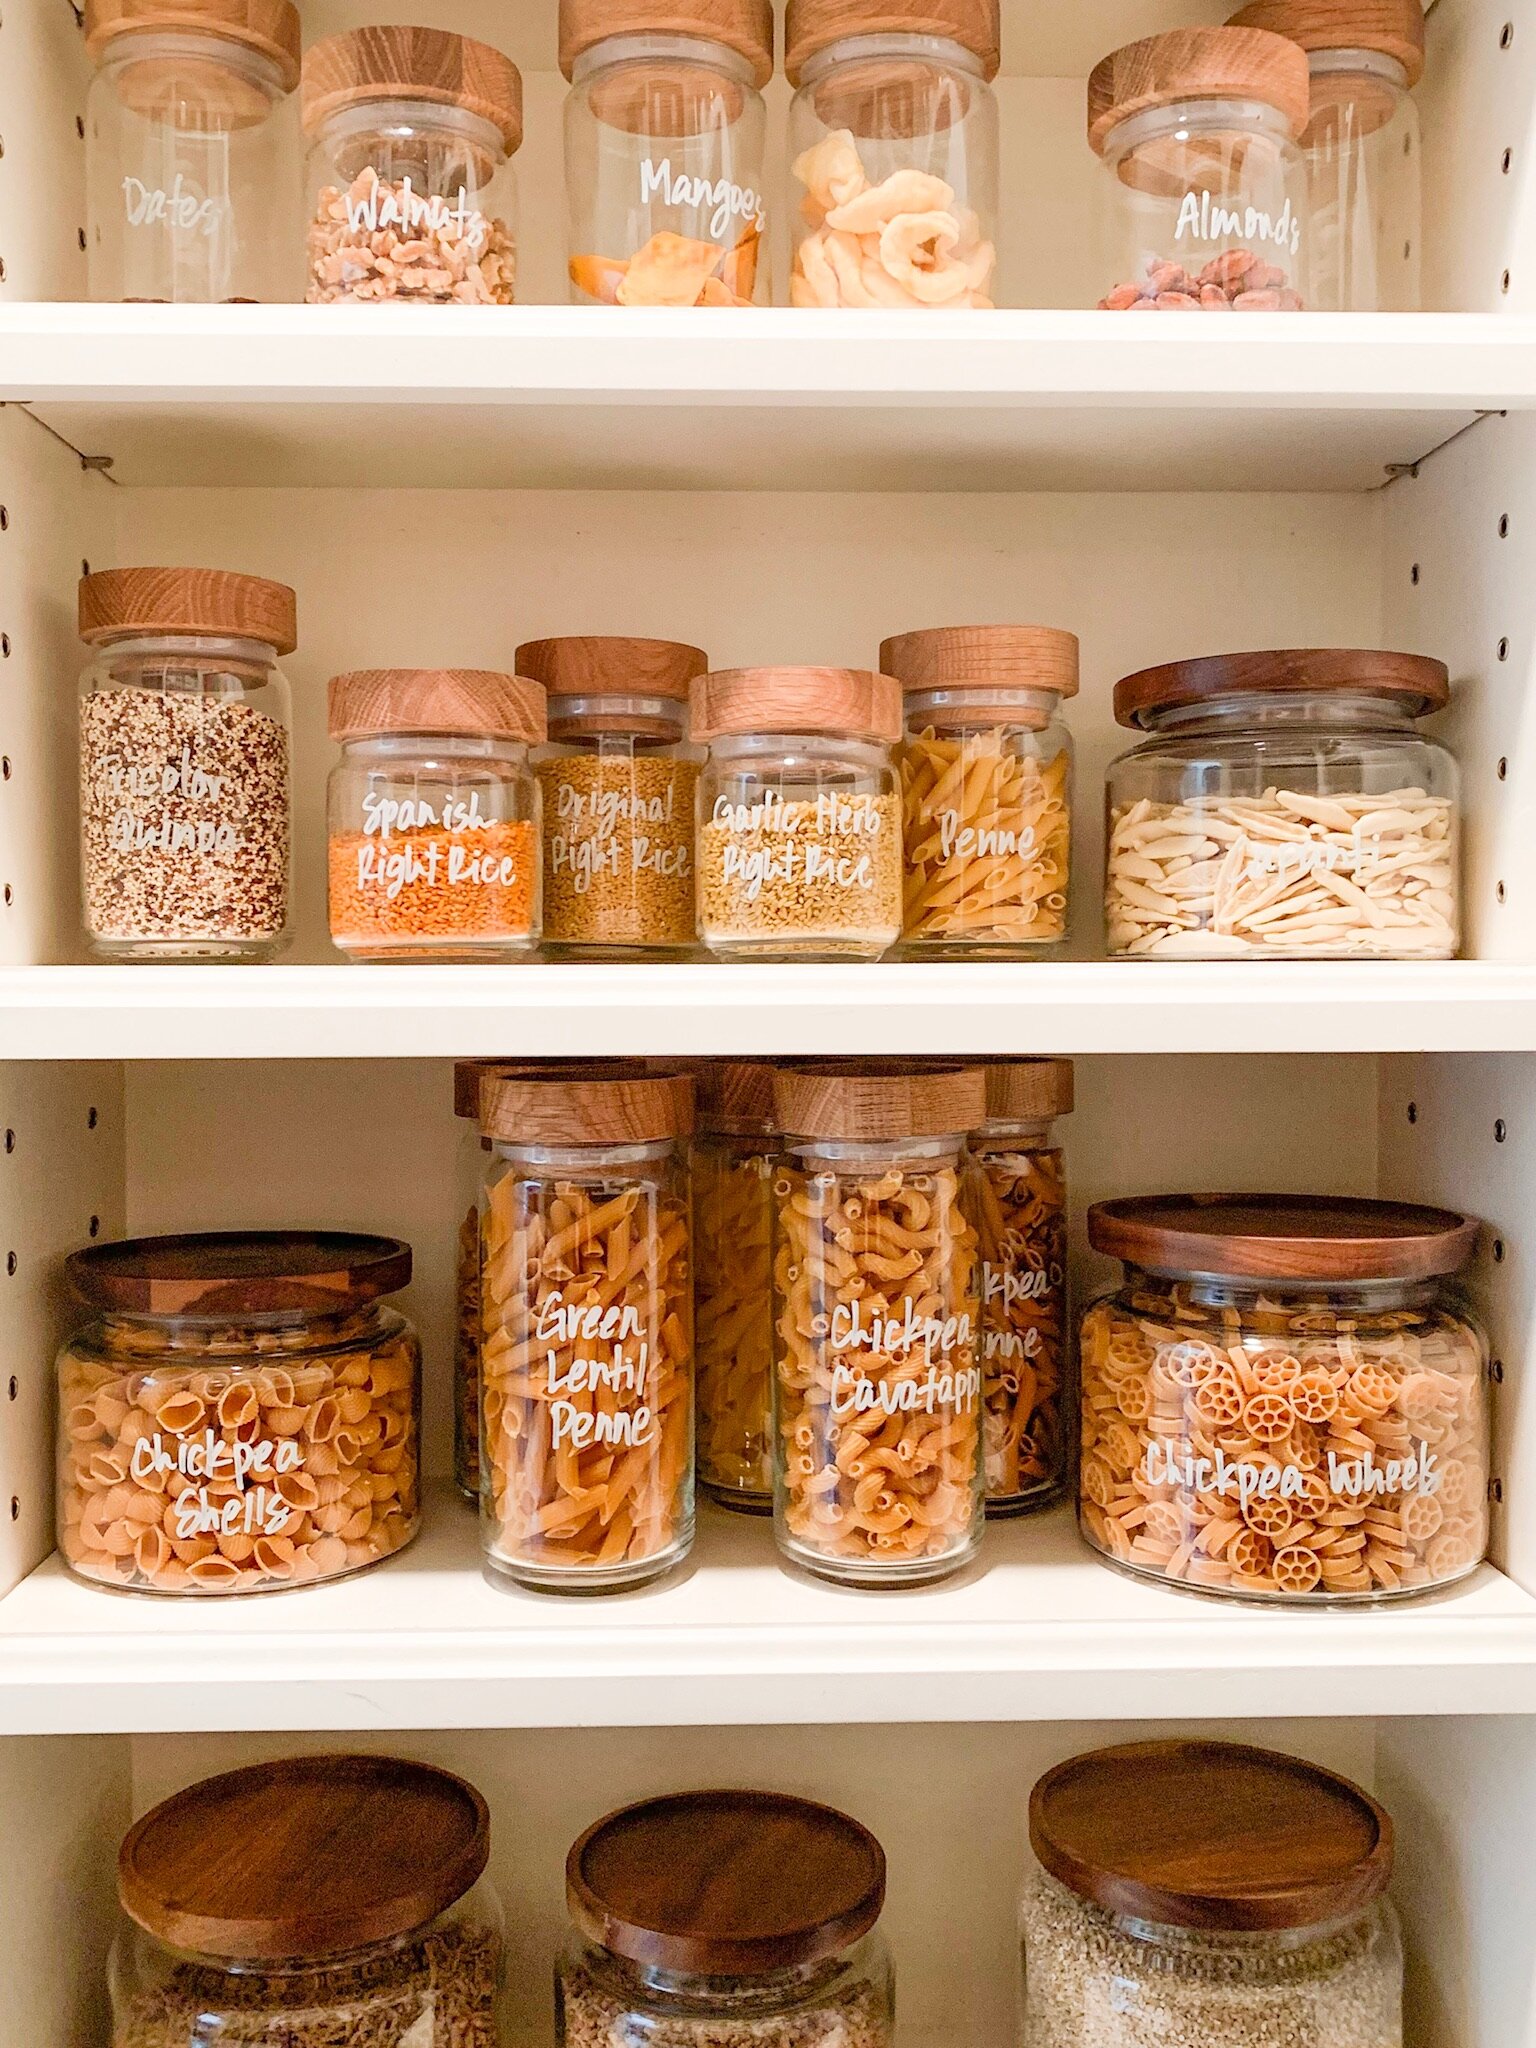 Labeling Your Pantry + Free Labels and Organizing Tips